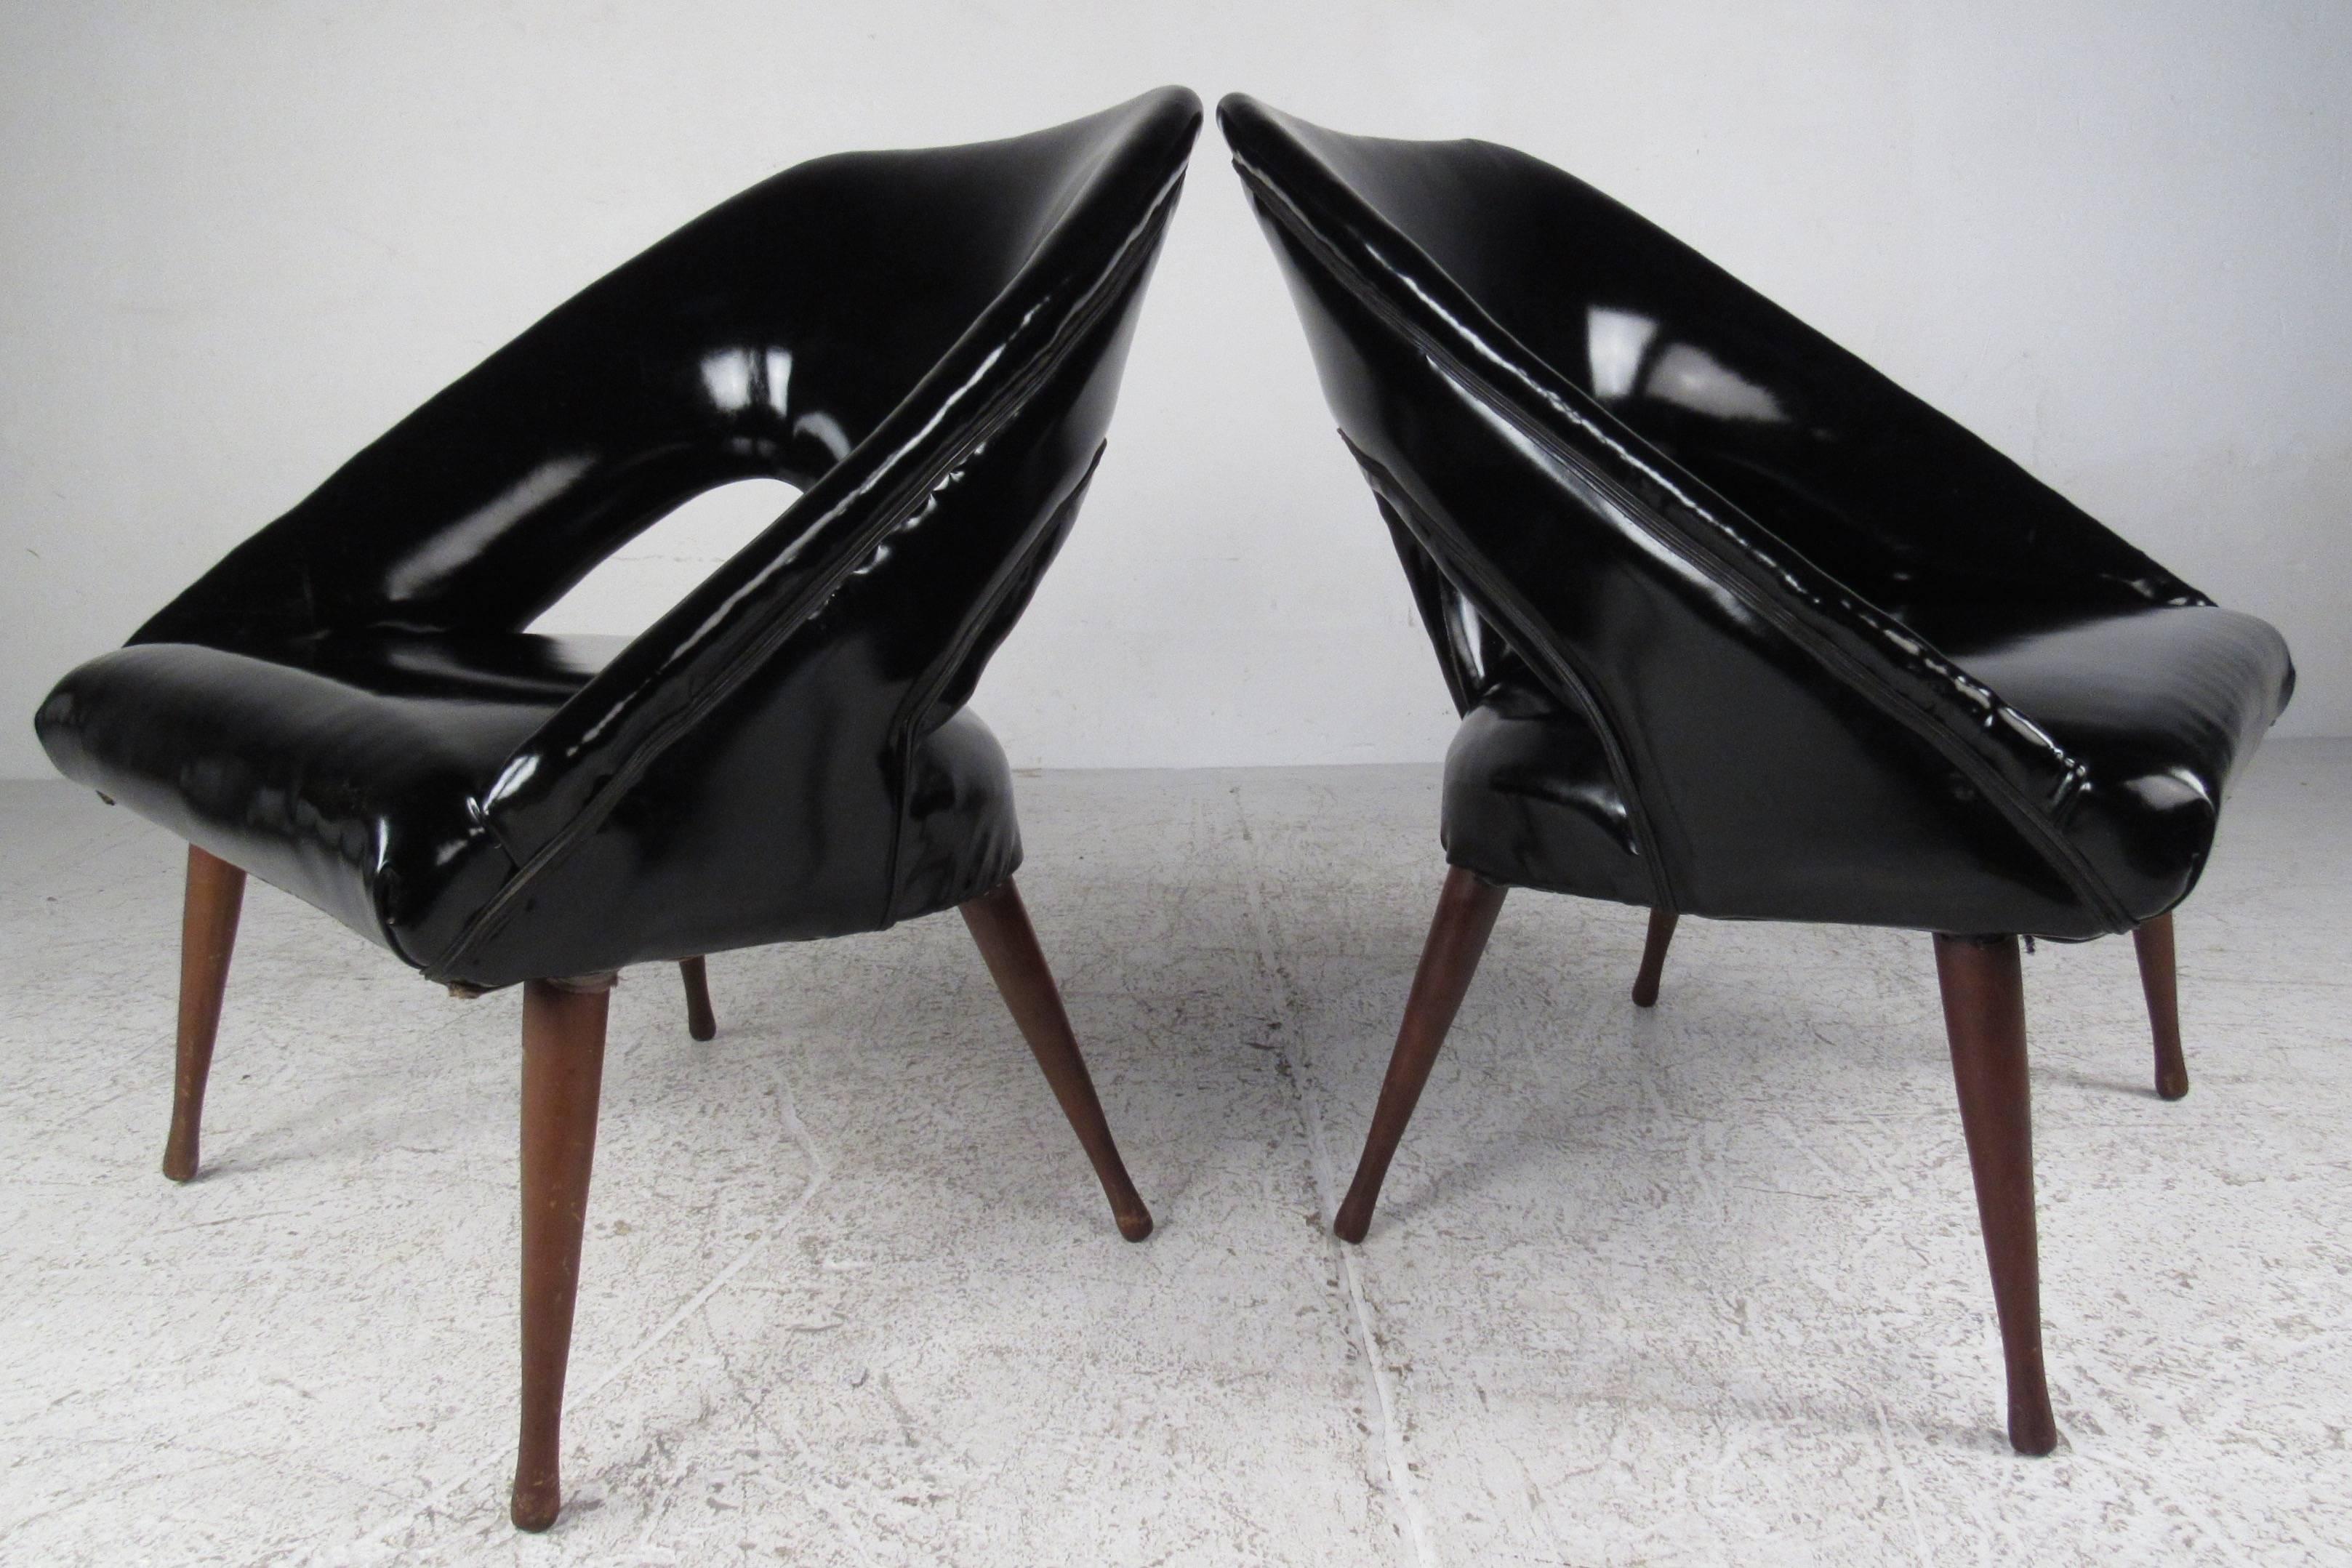 Sleek pair of vintage modern glossy black vinyl lounge chairs with tapered wood legs. This unusual pair of chairs feature a barrel back rest with two cut outs and low angled arm rests. Thick padded seating and splayed drumstick legs make this